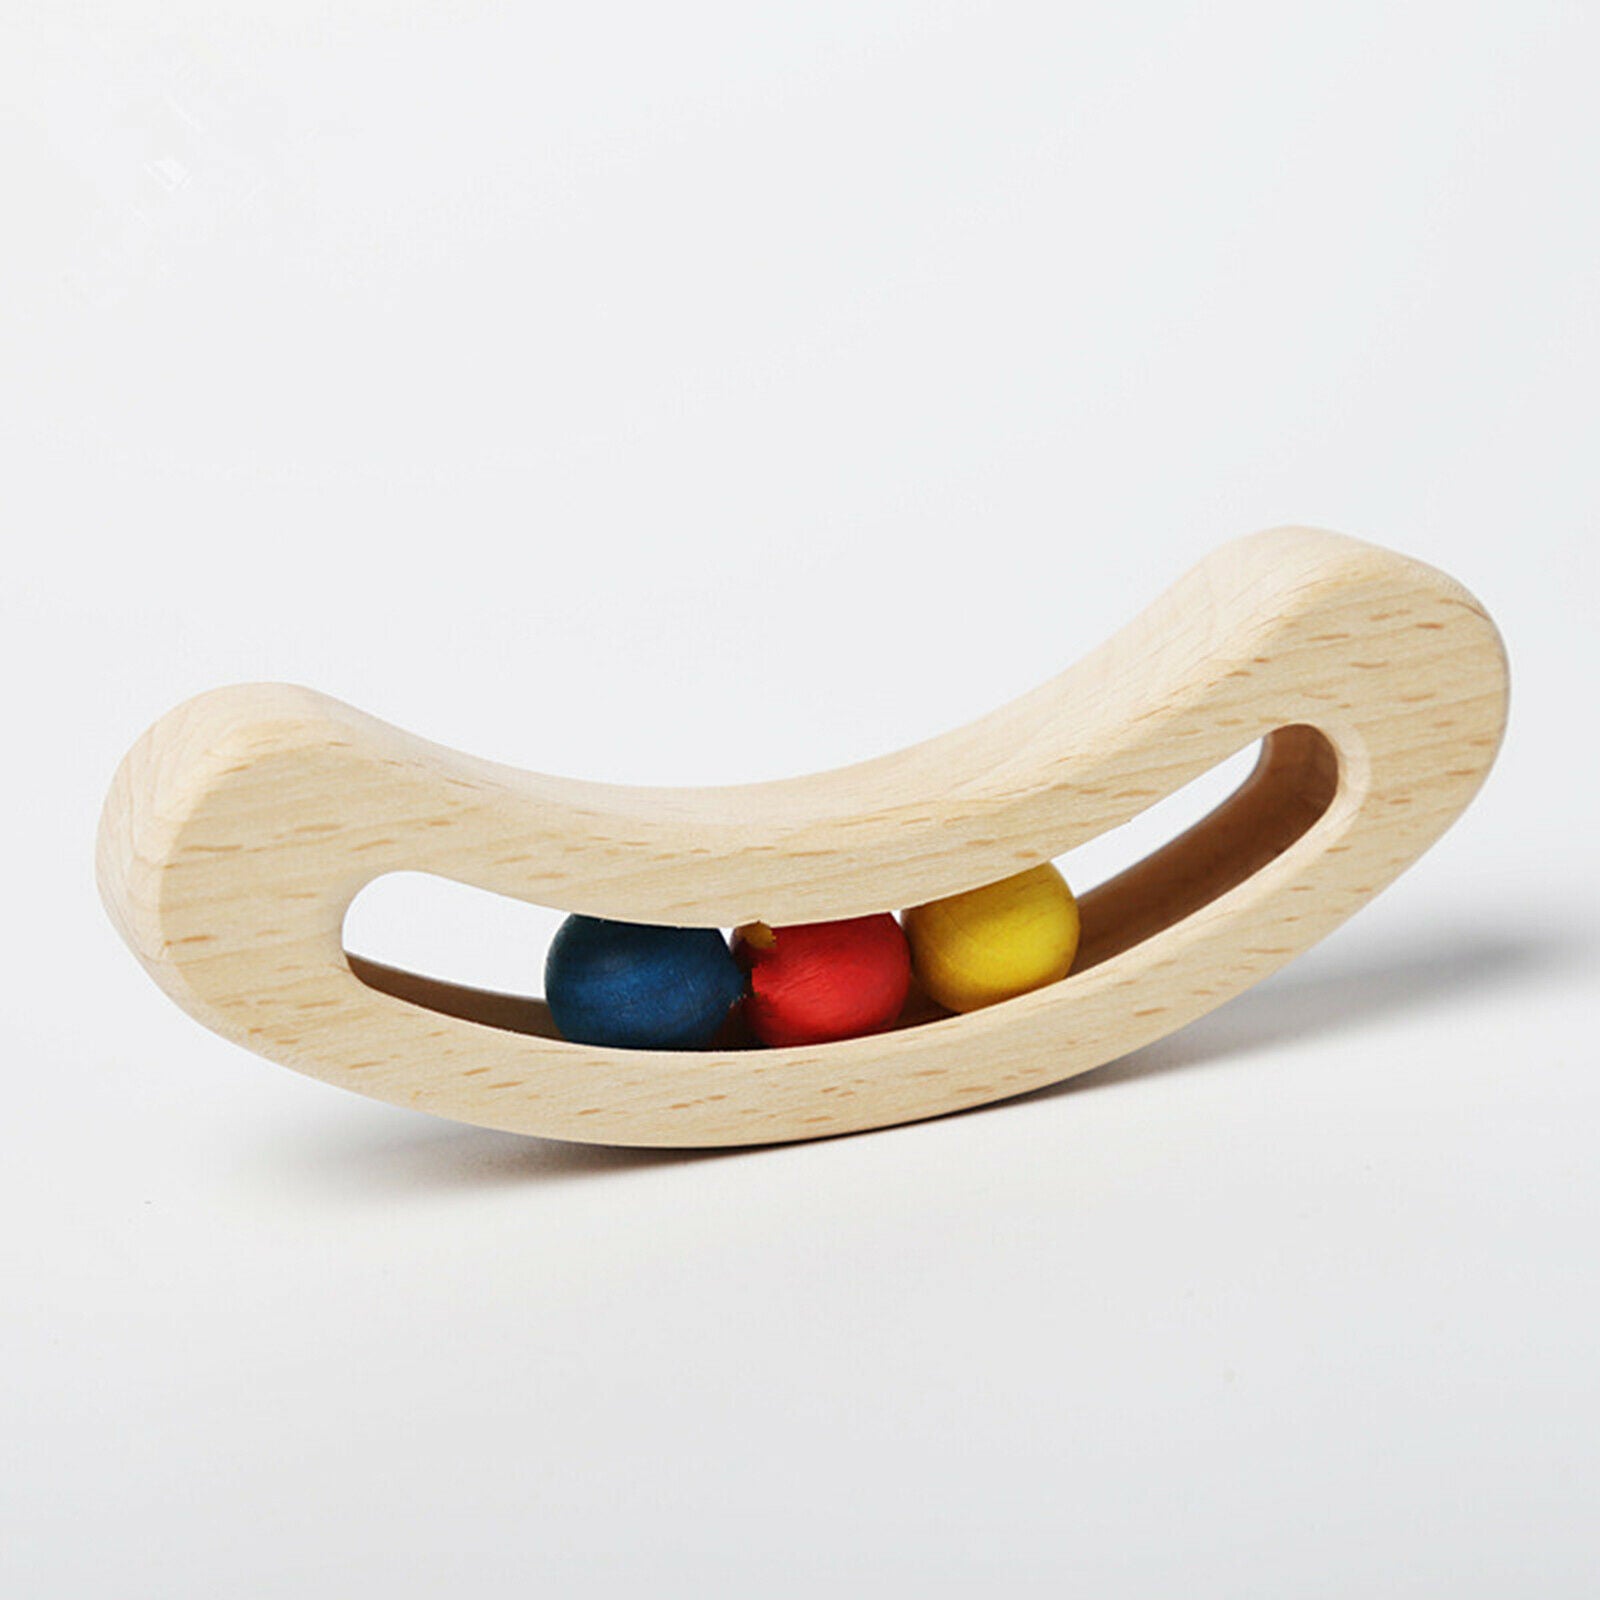 Handcrafted wooden rattle bead gripping toys for toddlers Montessori